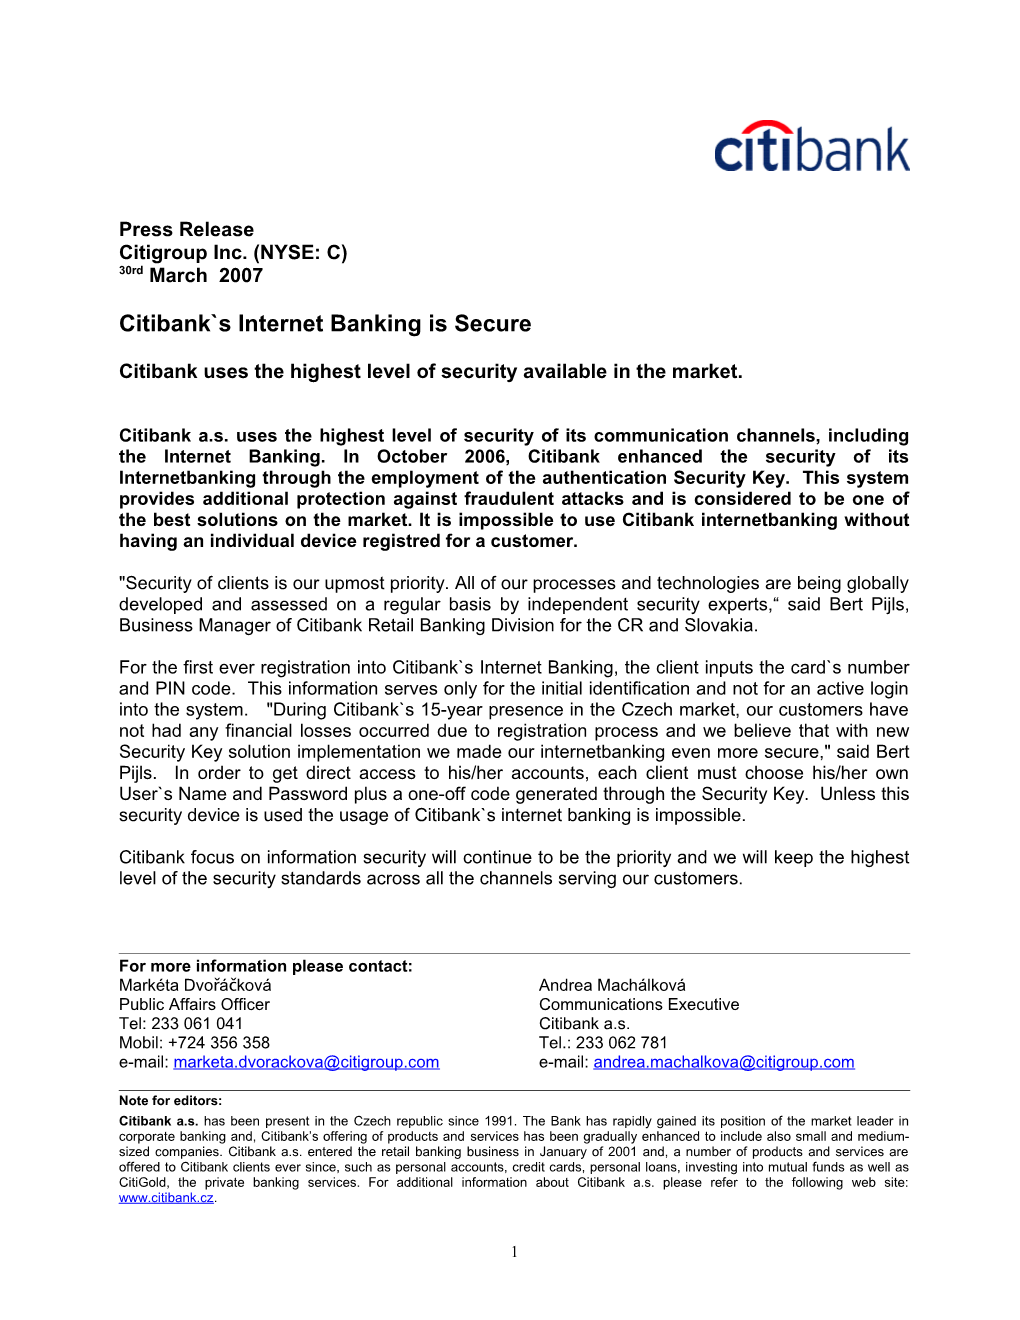 Citibank S Internet Banking Is Secure